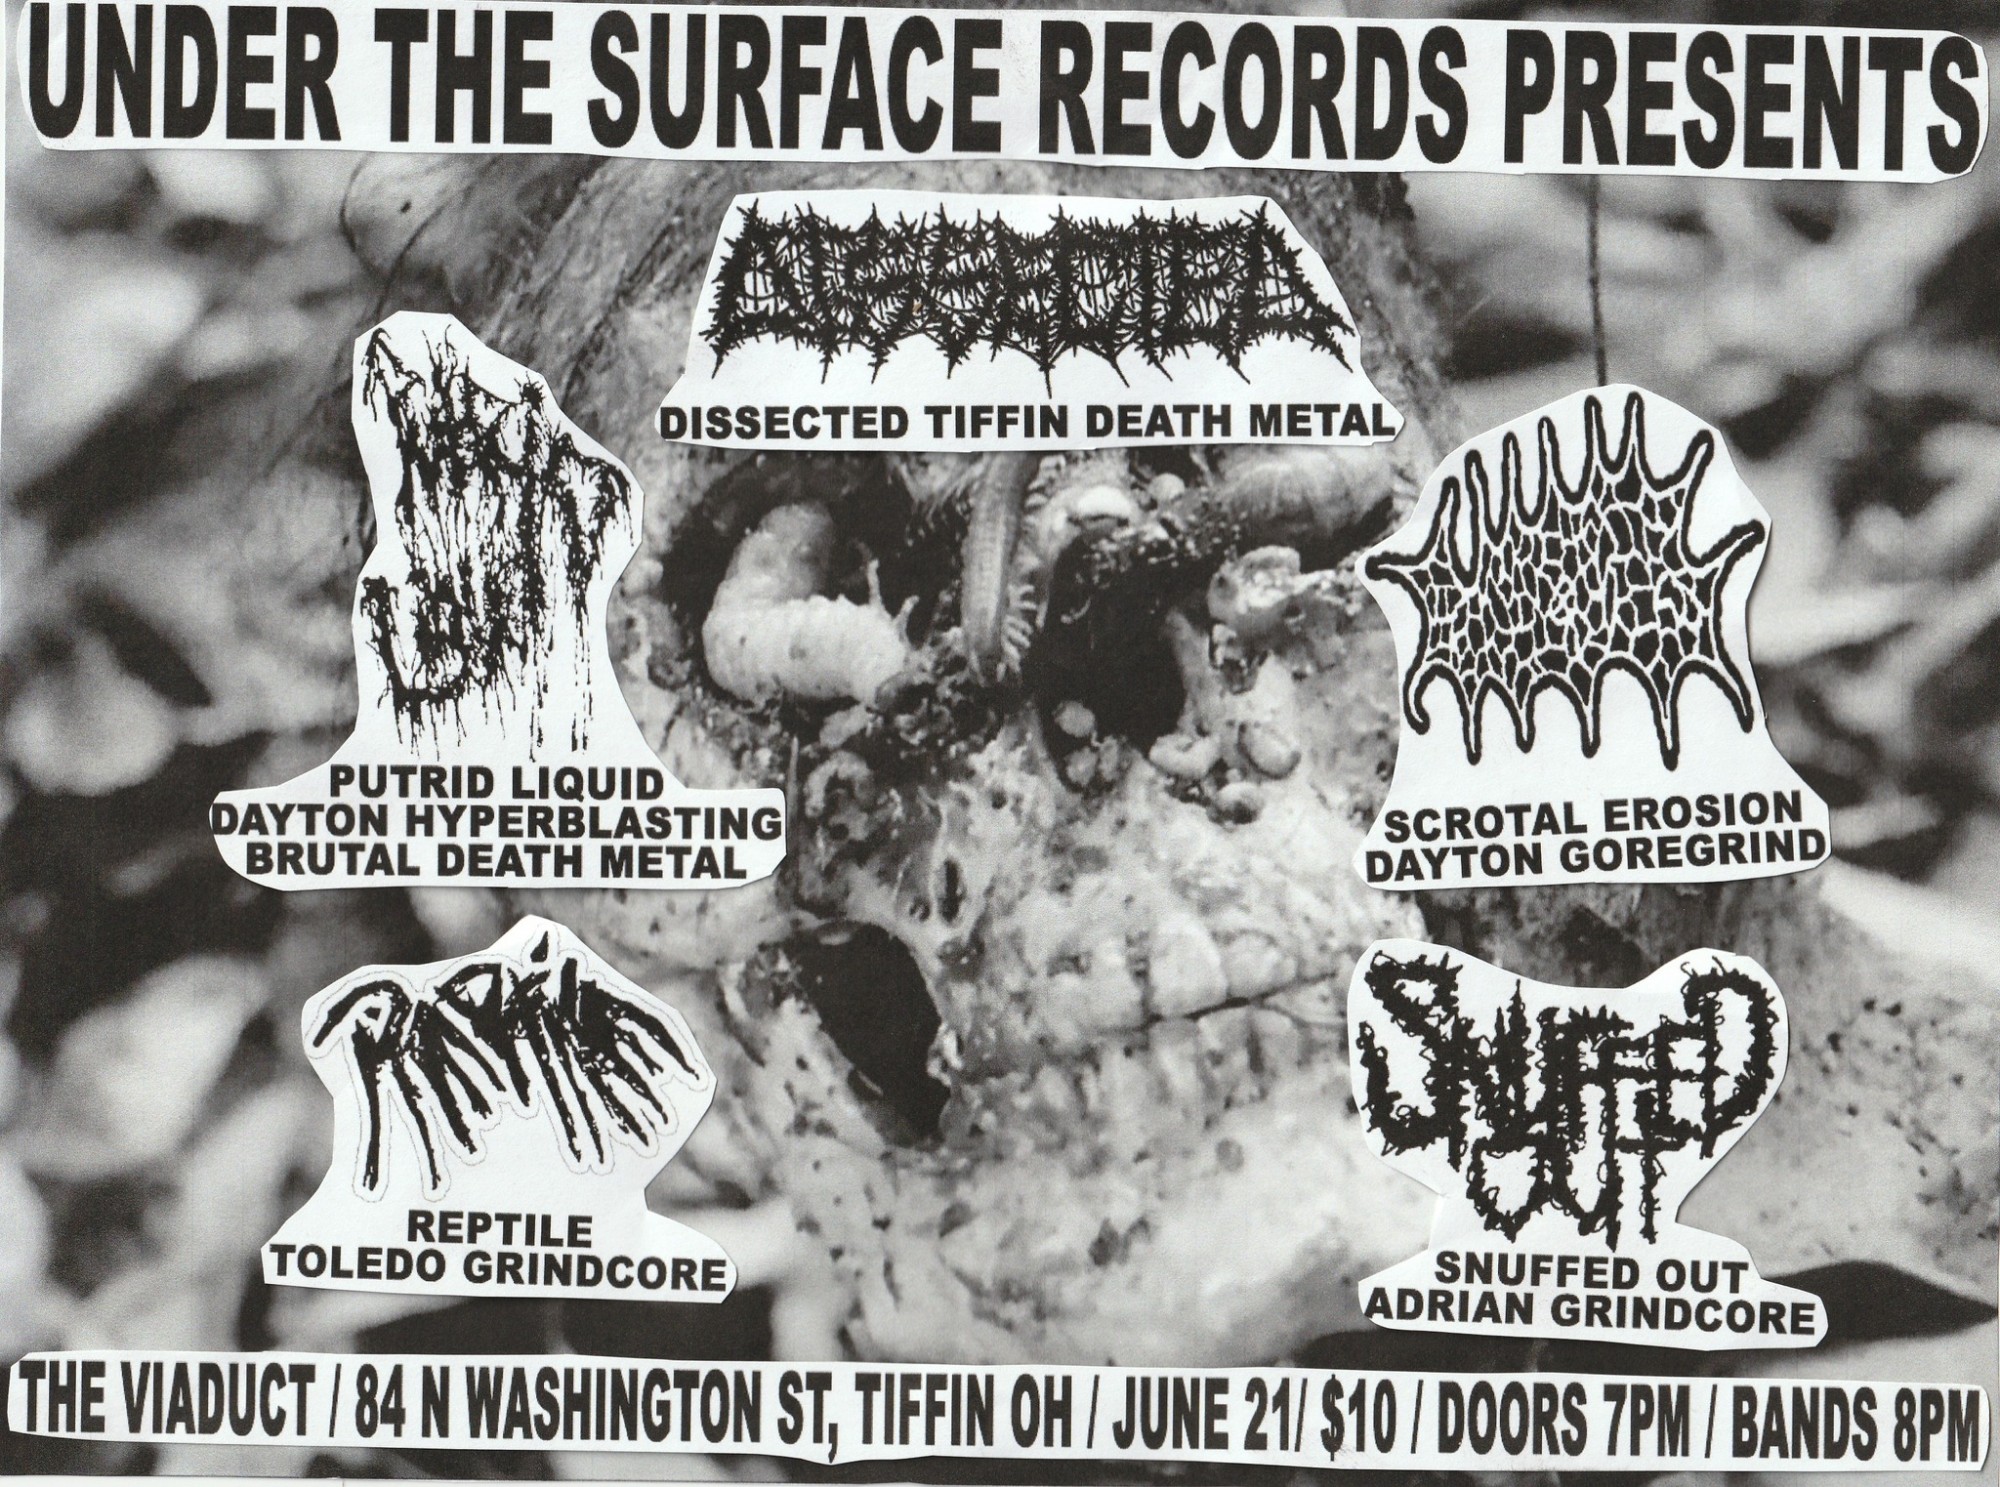 Dissected, Putrid Liquid, Scrotal Erosion, Reptile, and Snuffed Out @ The Viaduct